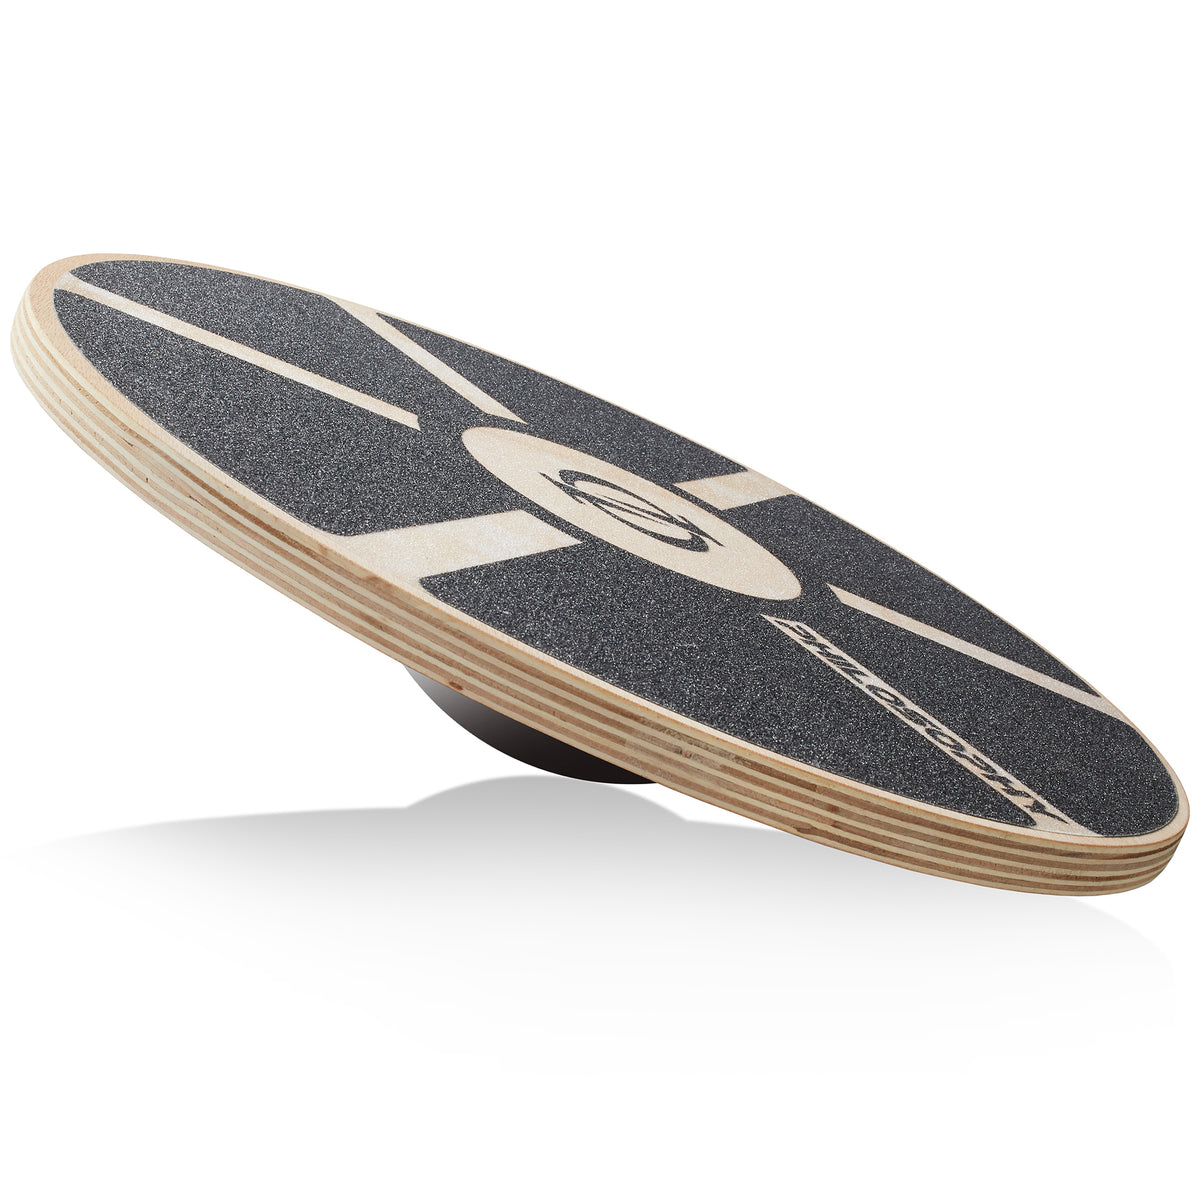 Philosophy Gym Balance Board - Wooden Balance Trainer With